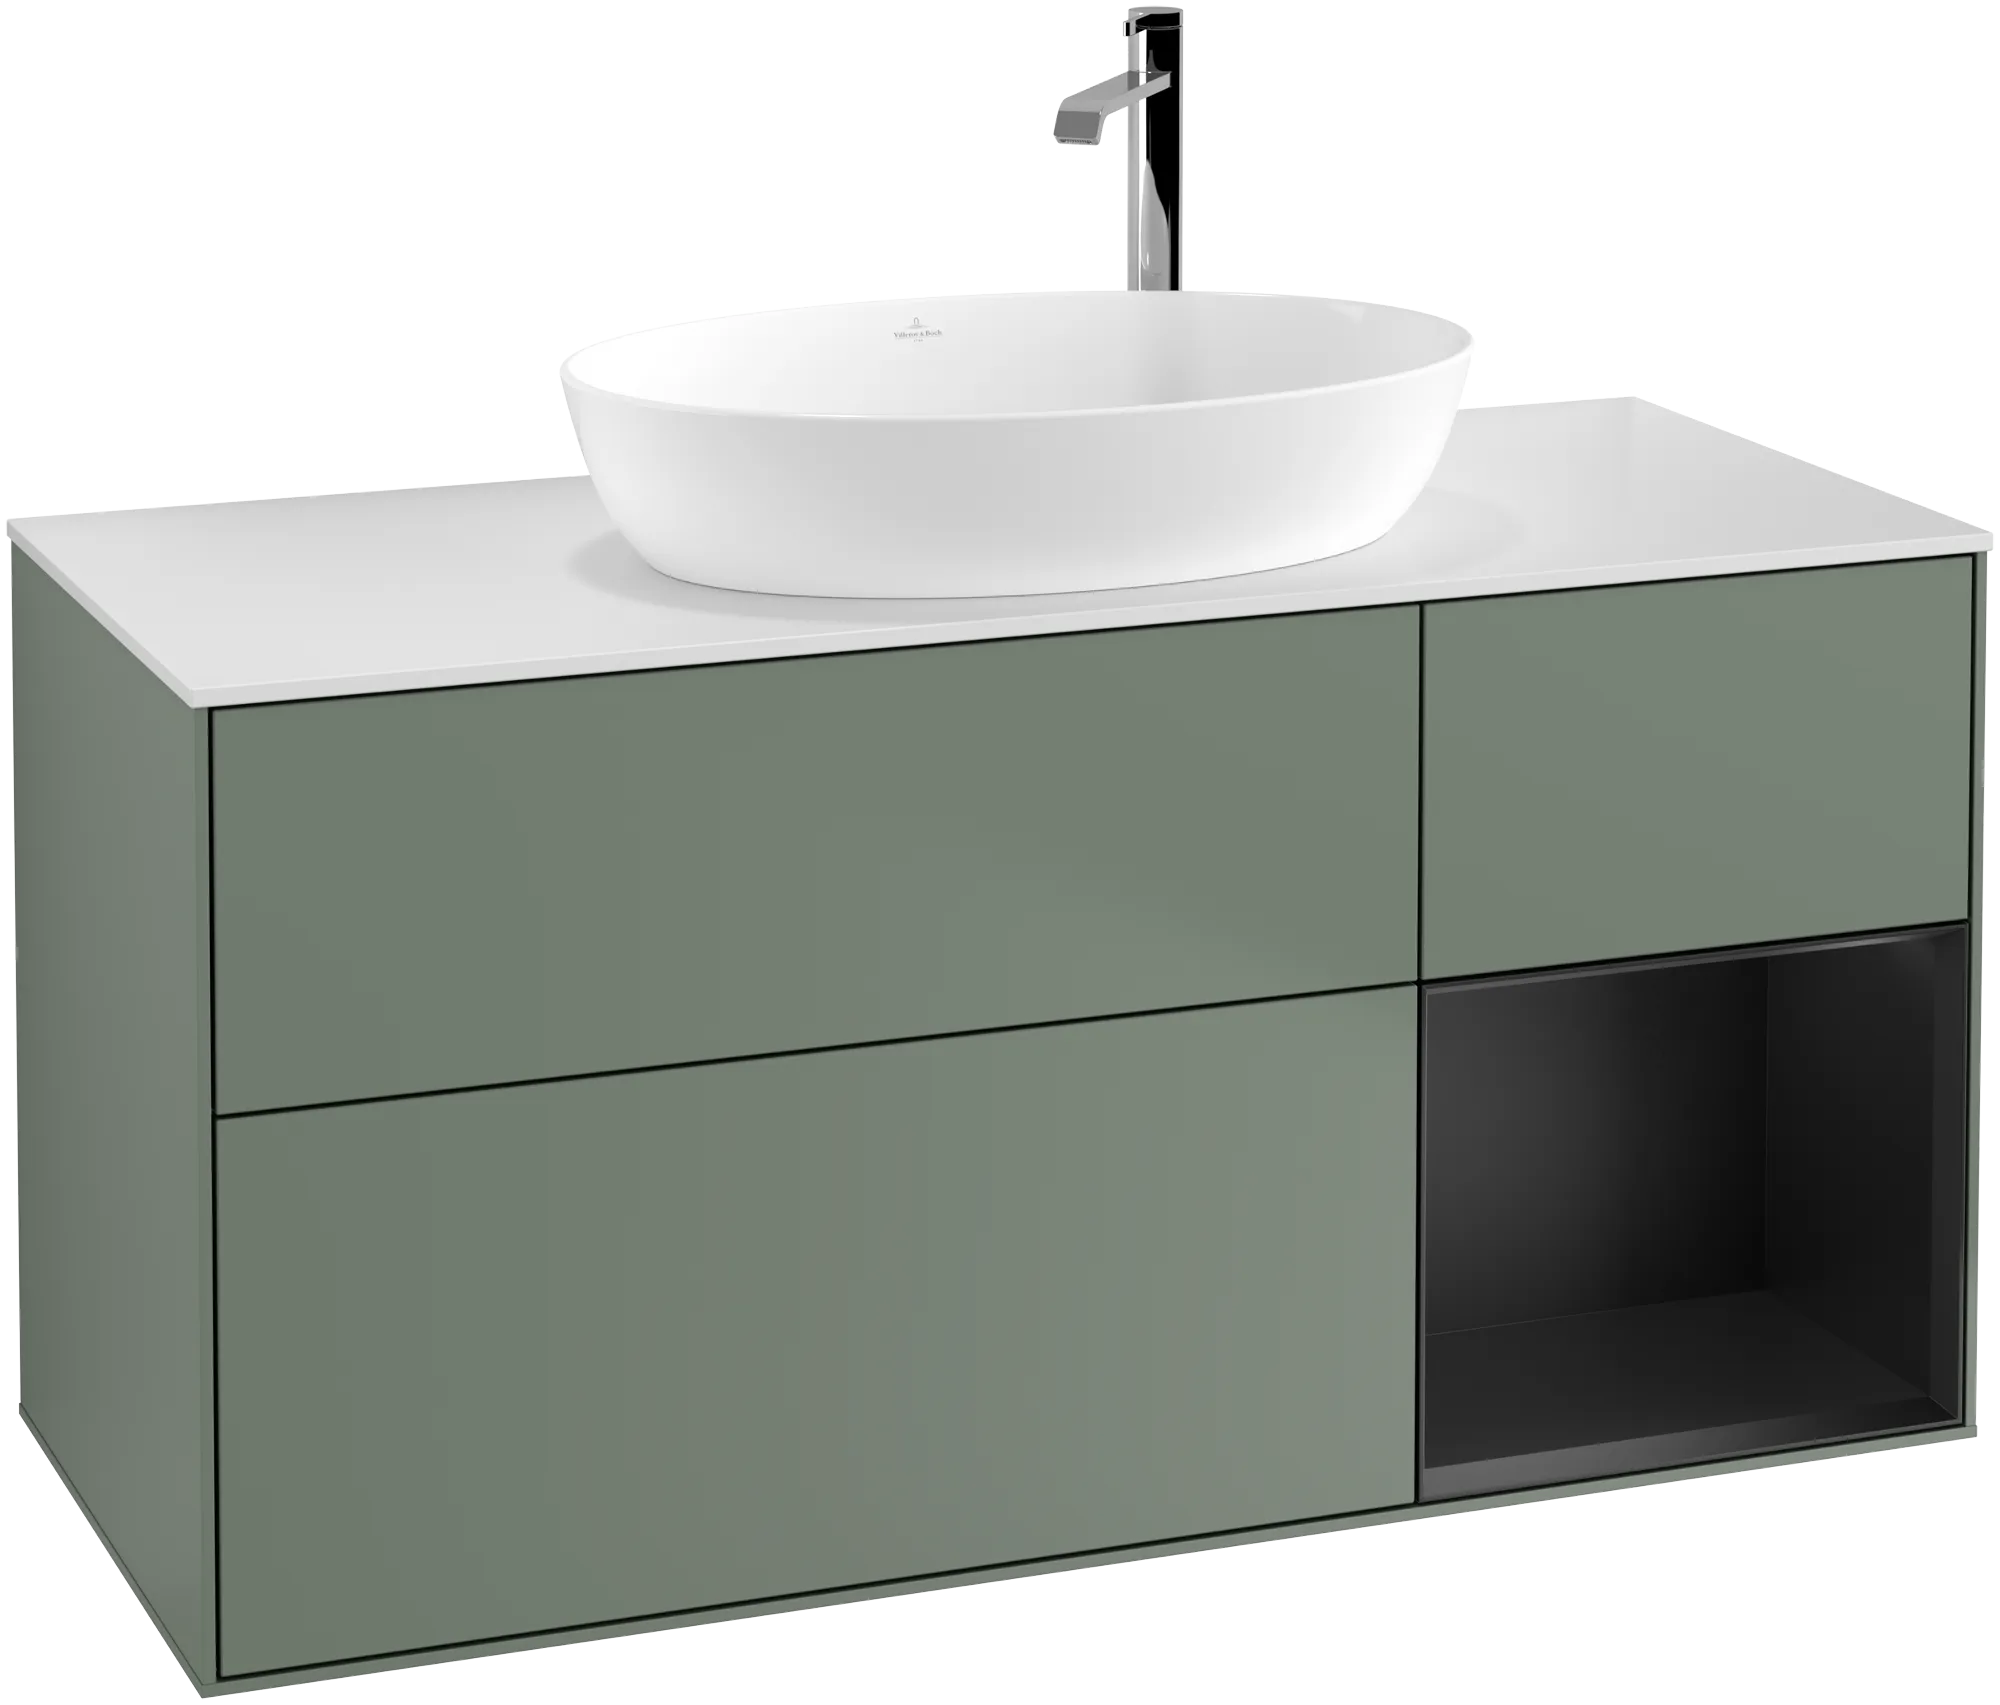 Picture of VILLEROY BOCH Finion Vanity unit, with lighting, 3 pull-out compartments, 1200 x 603 x 501 mm, Olive Matt Lacquer / Black Matt Lacquer / Glass White Matt #G951PDGM